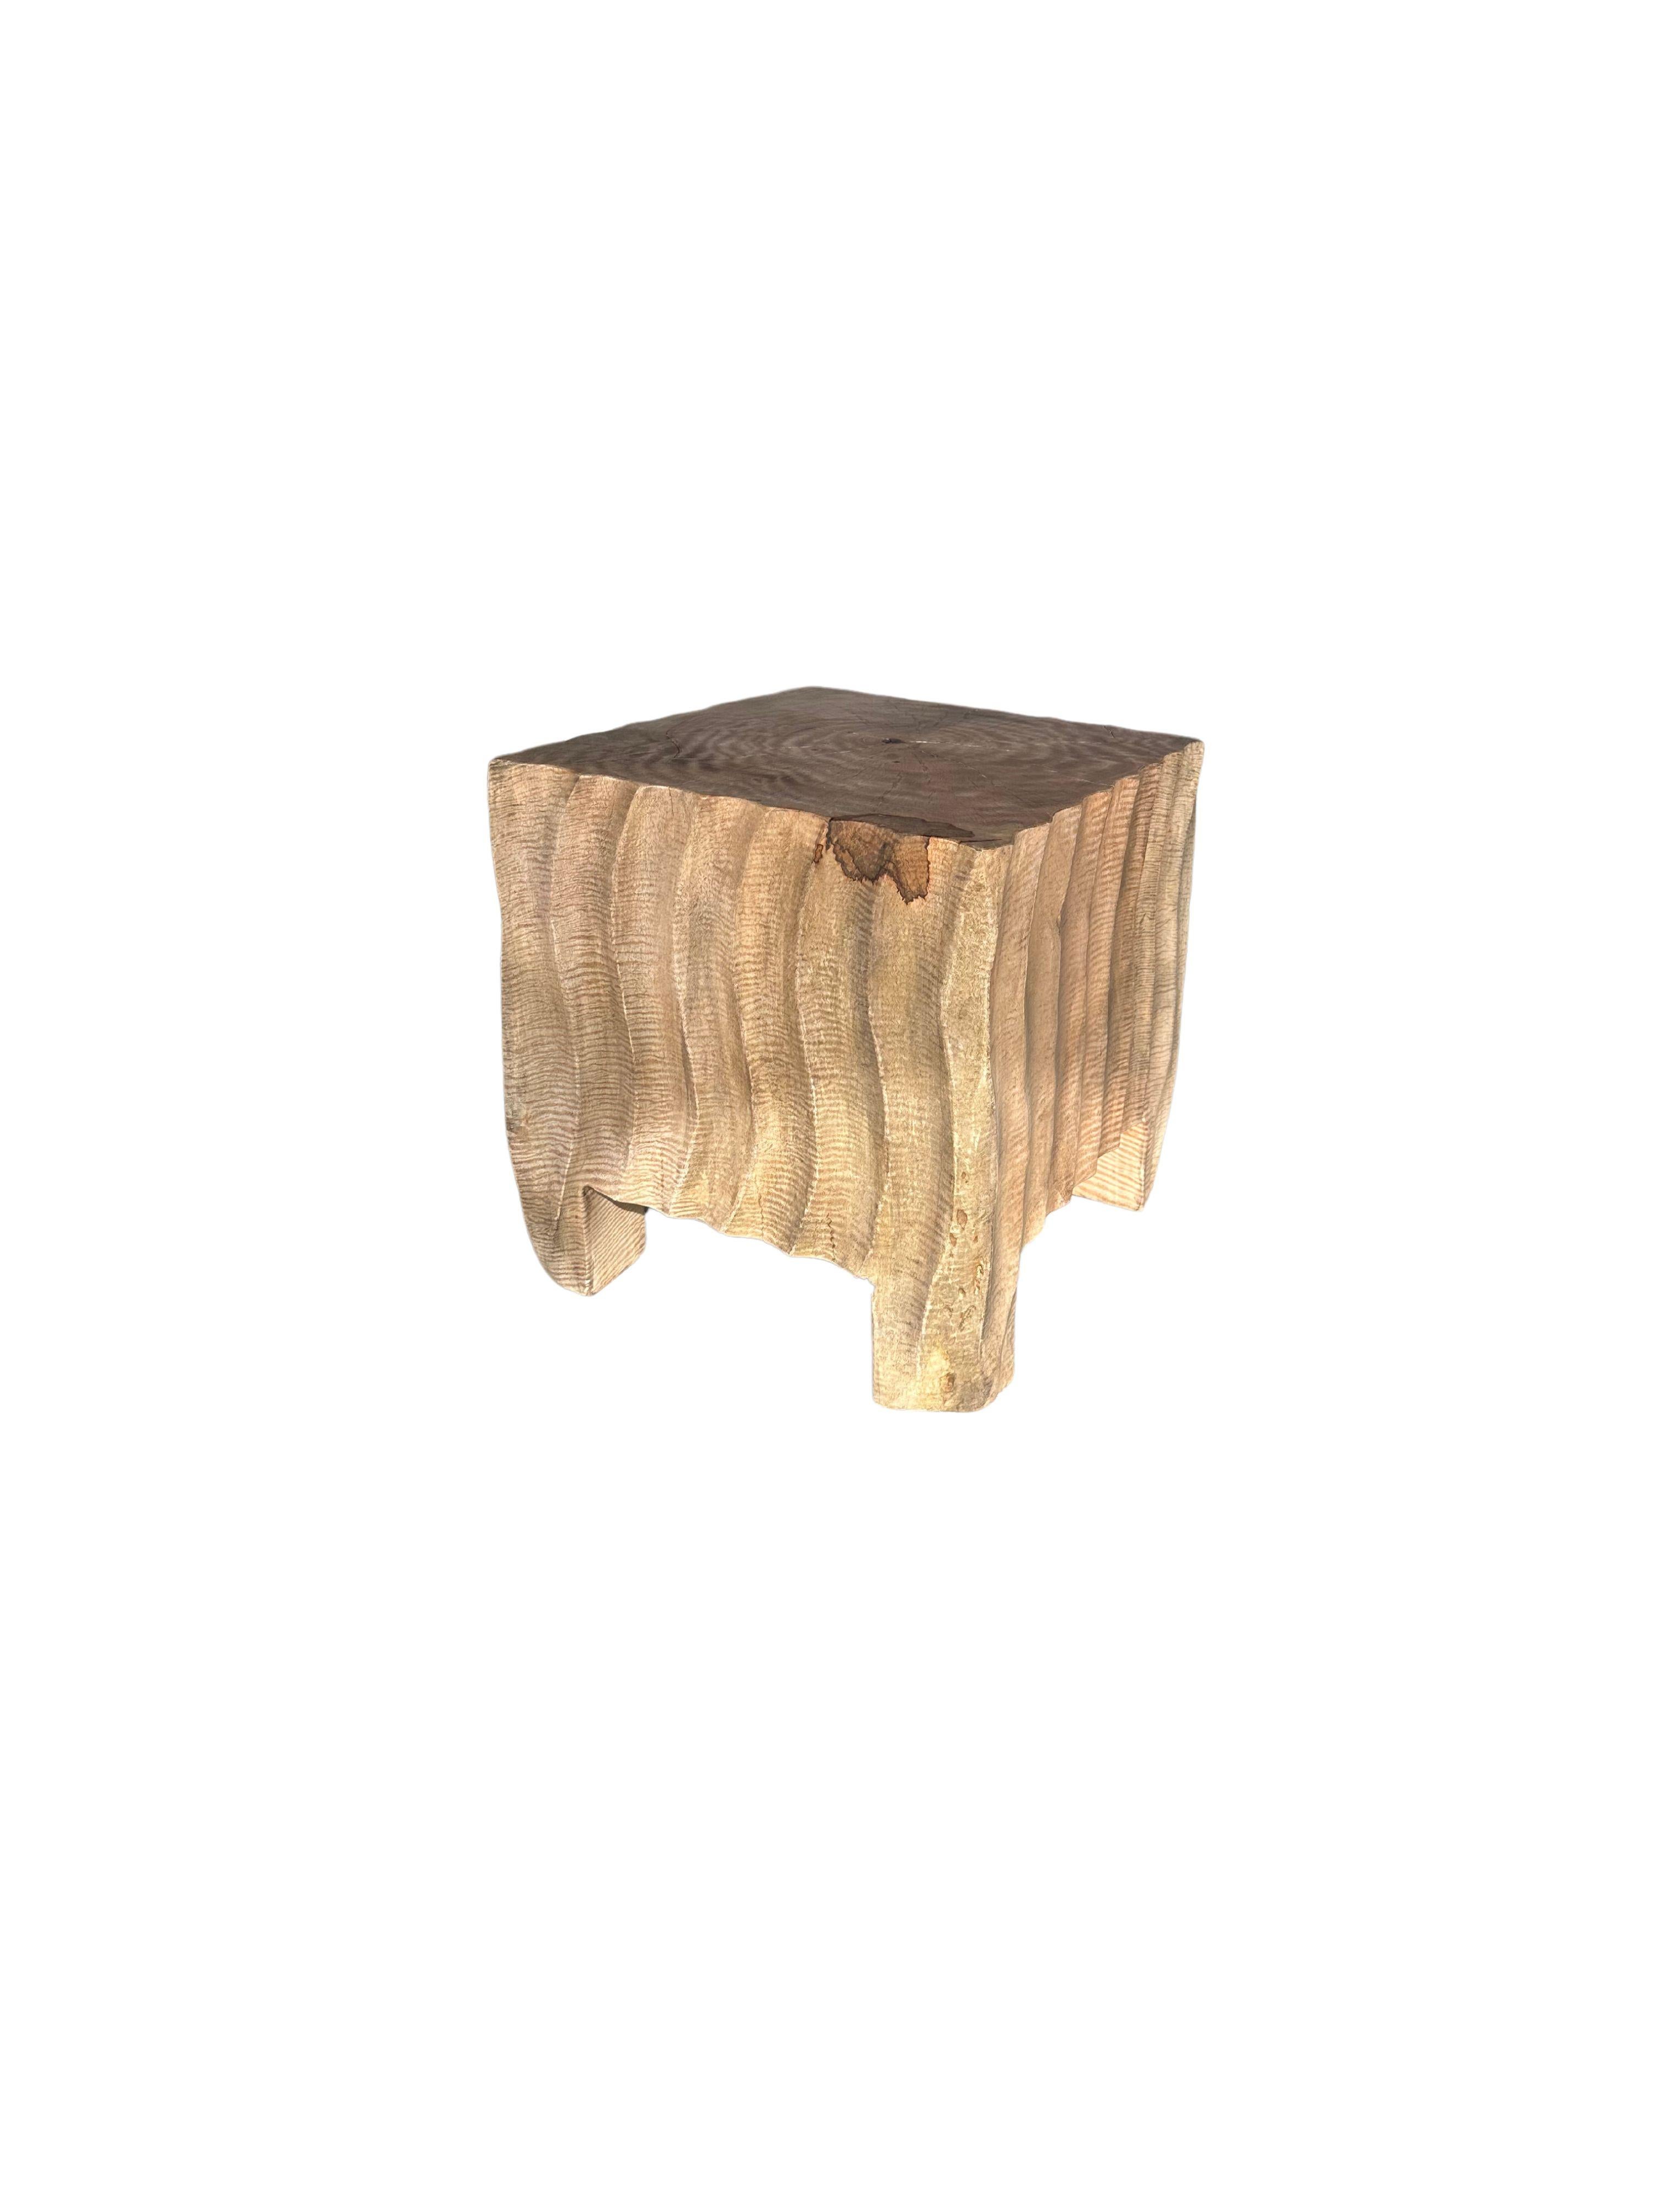 Contemporary Sculptural Side Table Mango Wood Natural Finish For Sale